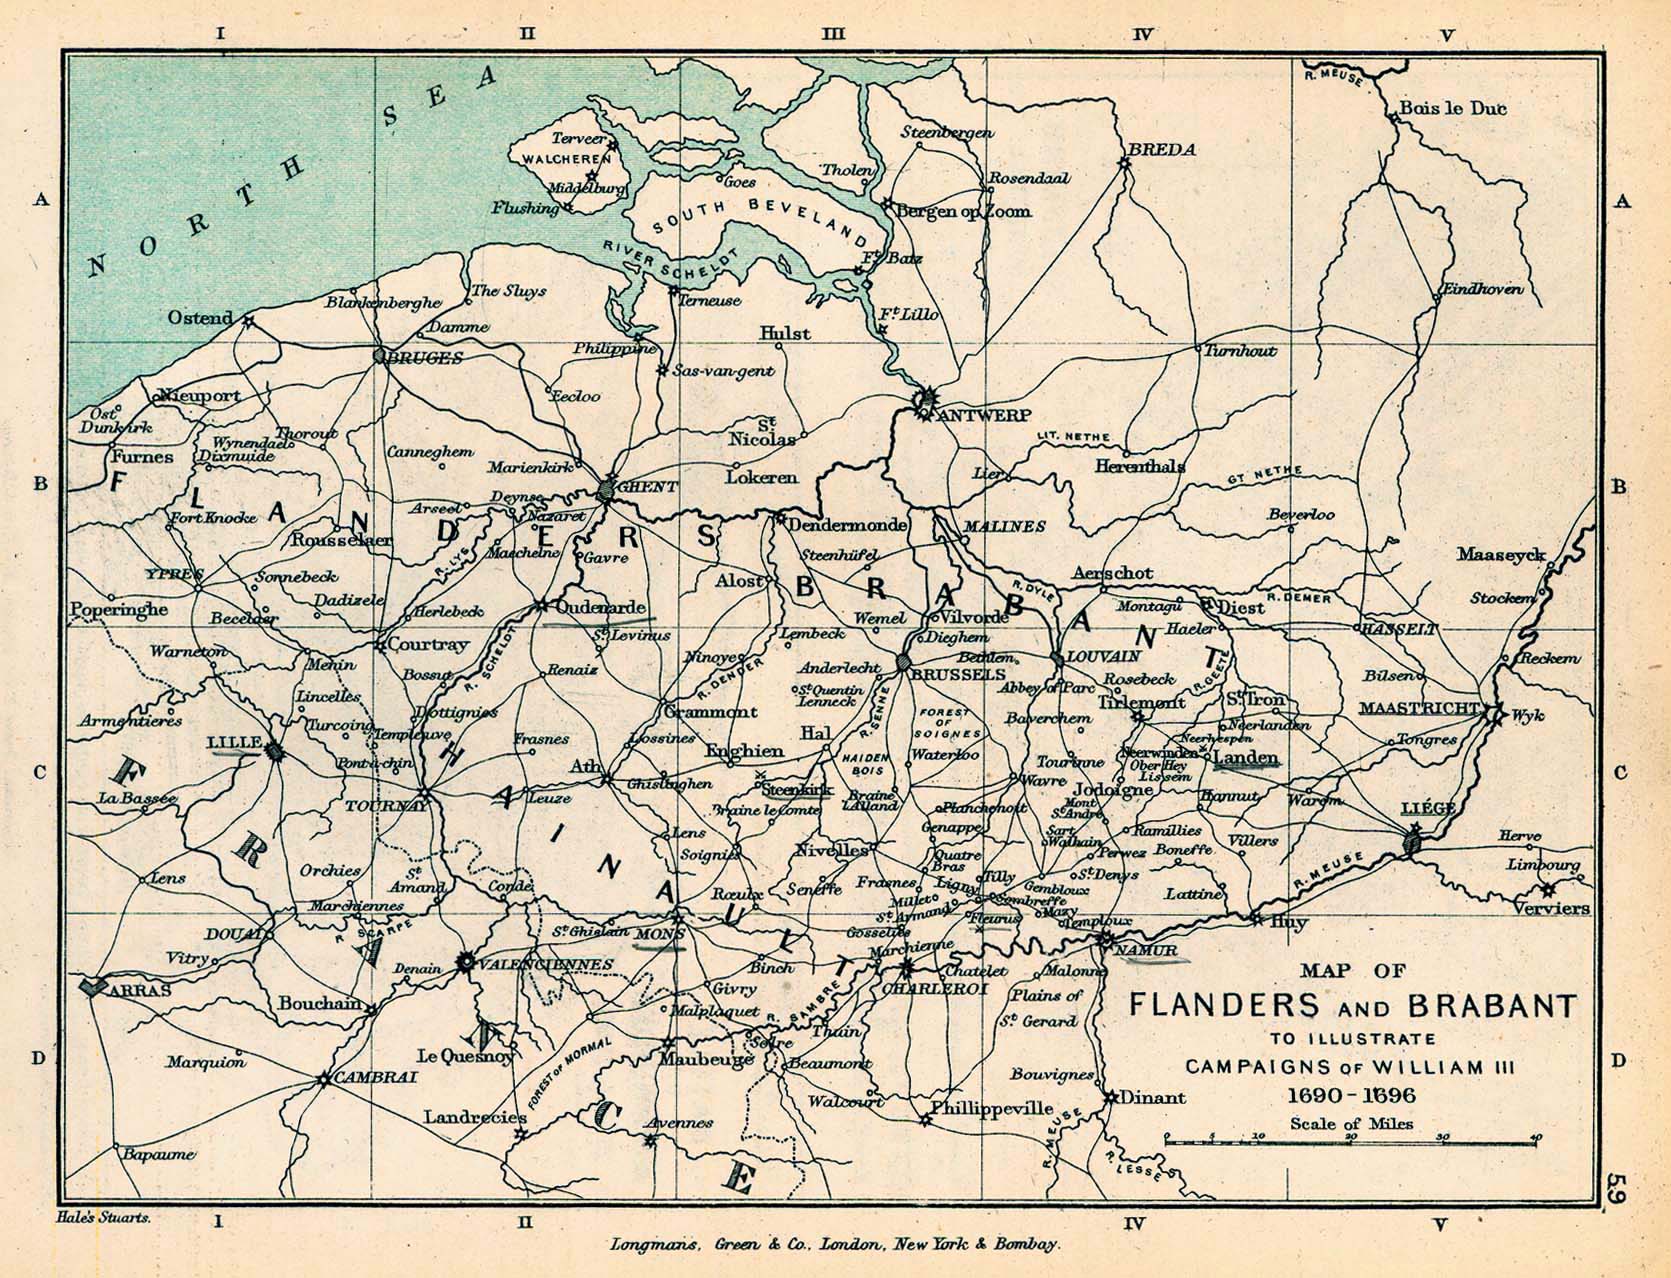 Map of Flanders and Brabant - The Campaigns of William III, 1690-1696